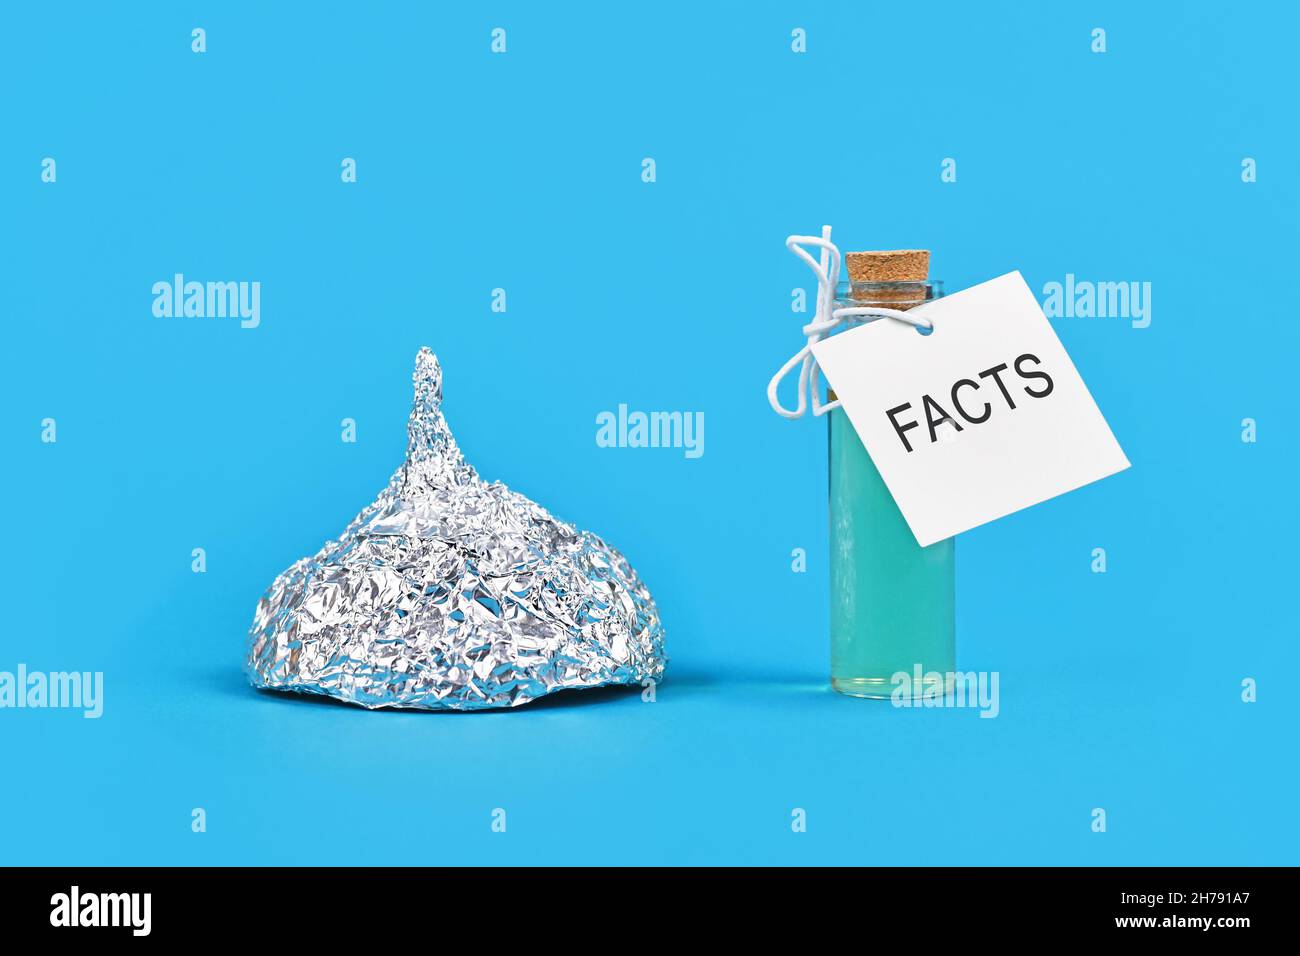 Concept for fighting conspiracy theories with facts with tinfoil hat and cure bottle with word 'facts' Stock Photo